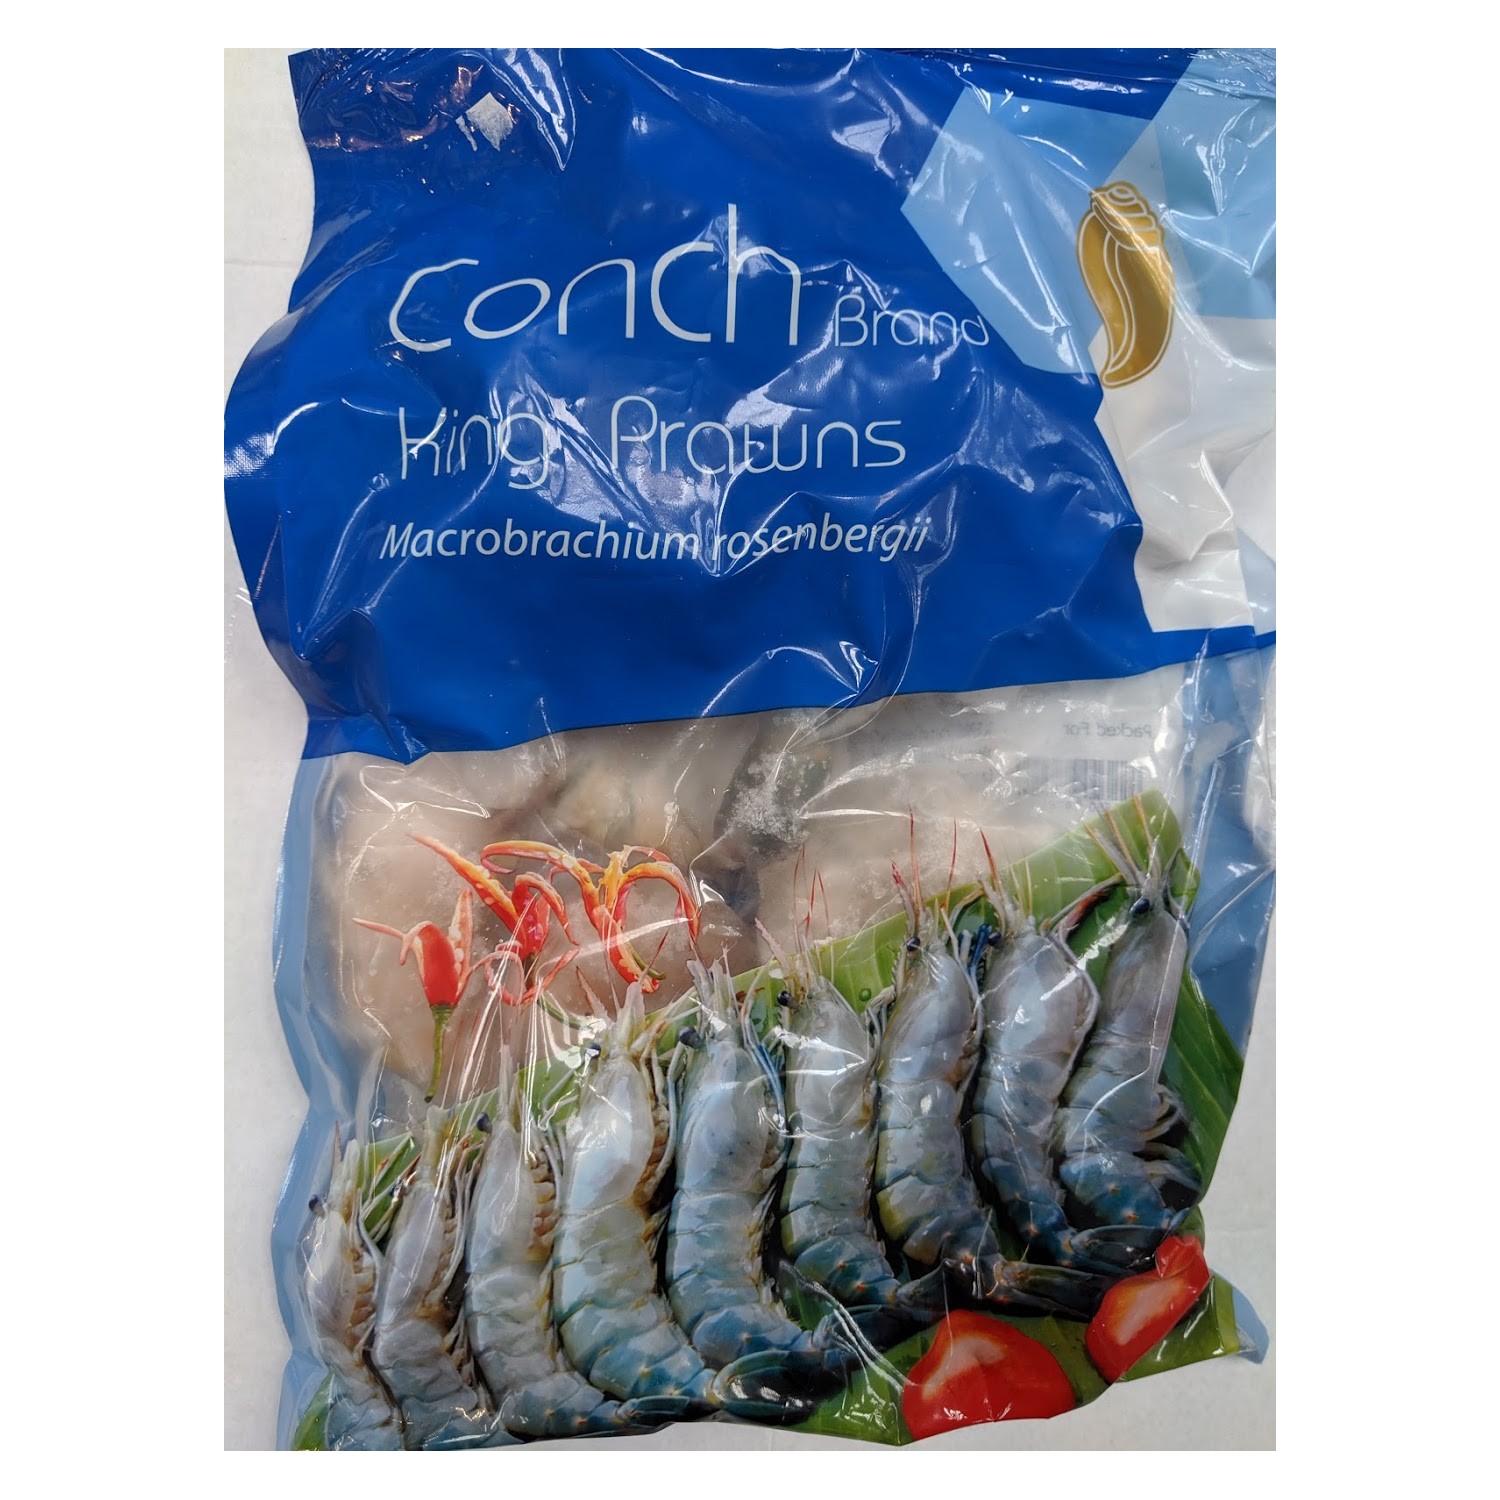 Conch King prawns 8/12 450g (800g) Fresh Water Headles Shell On Easy Peel IQF (Individually Quick Frozen) king prawns